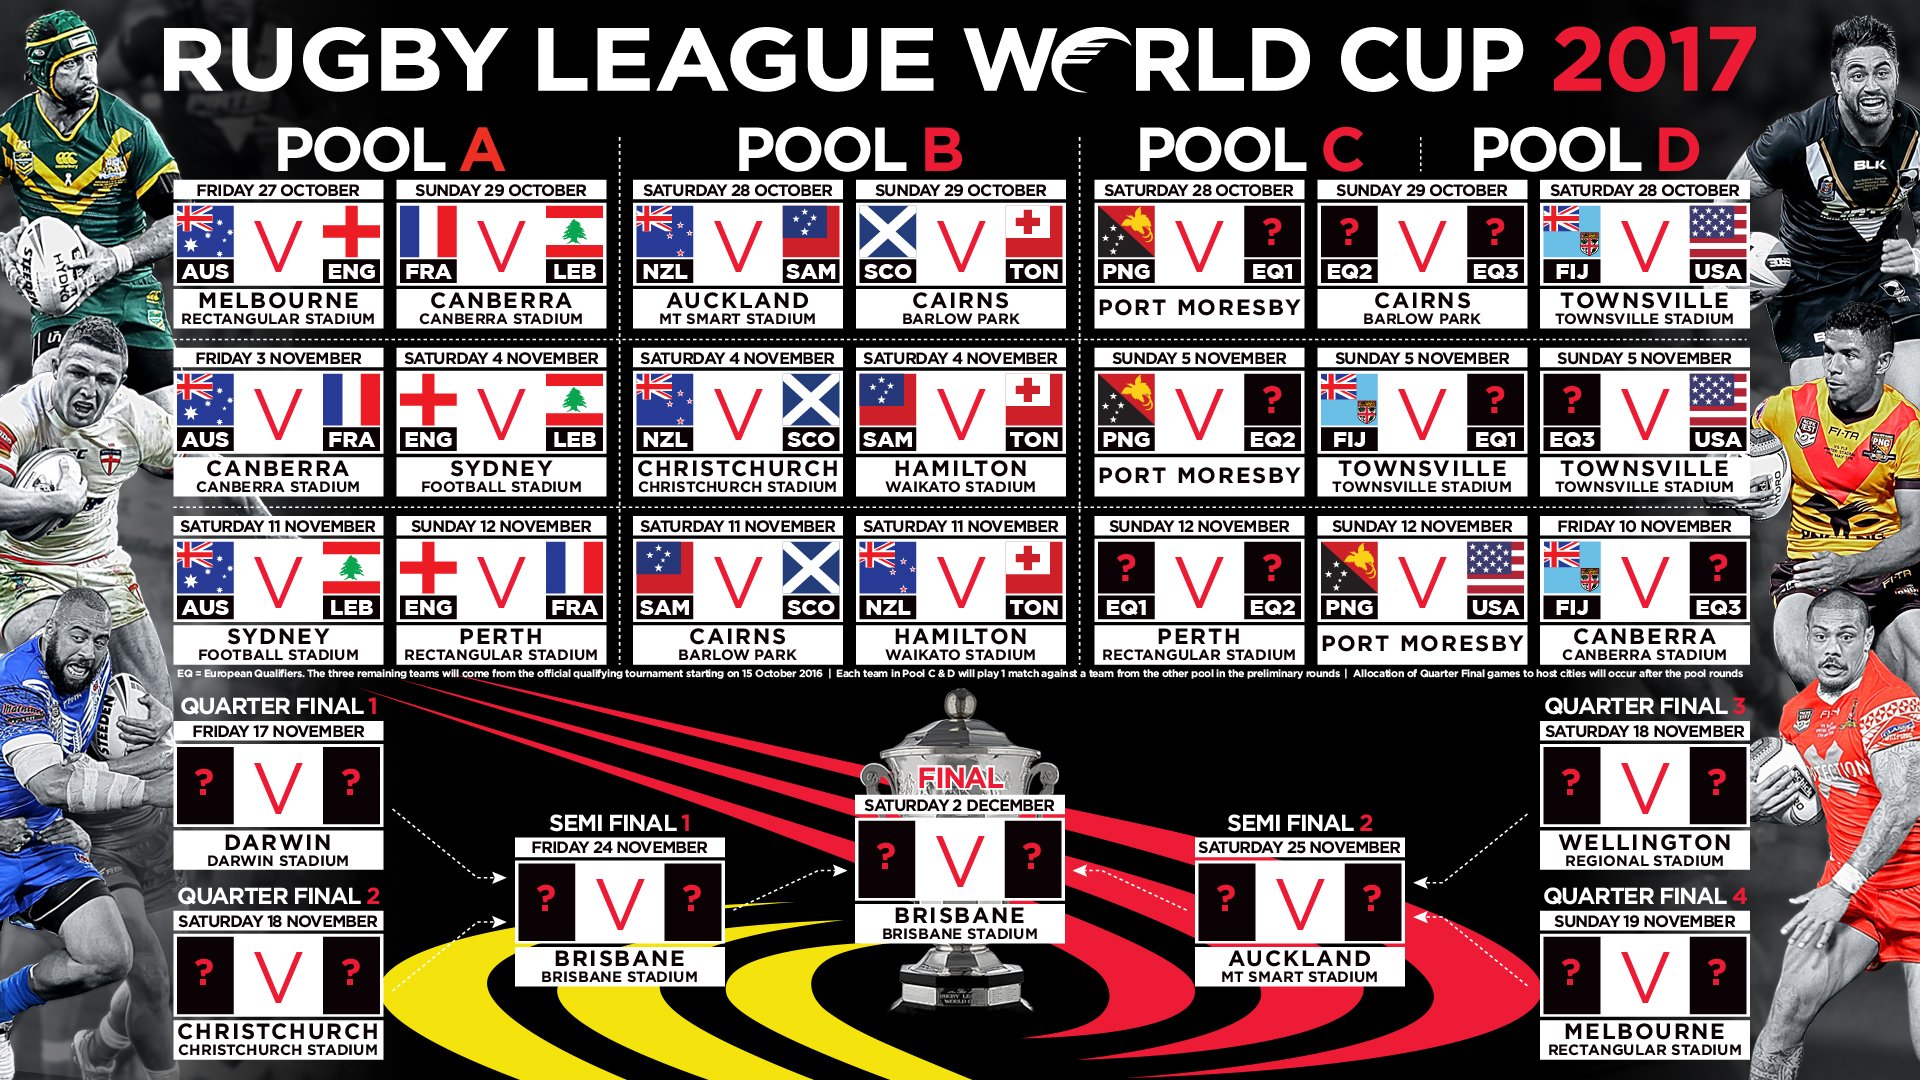 Rugby League World Cup 2021 on X